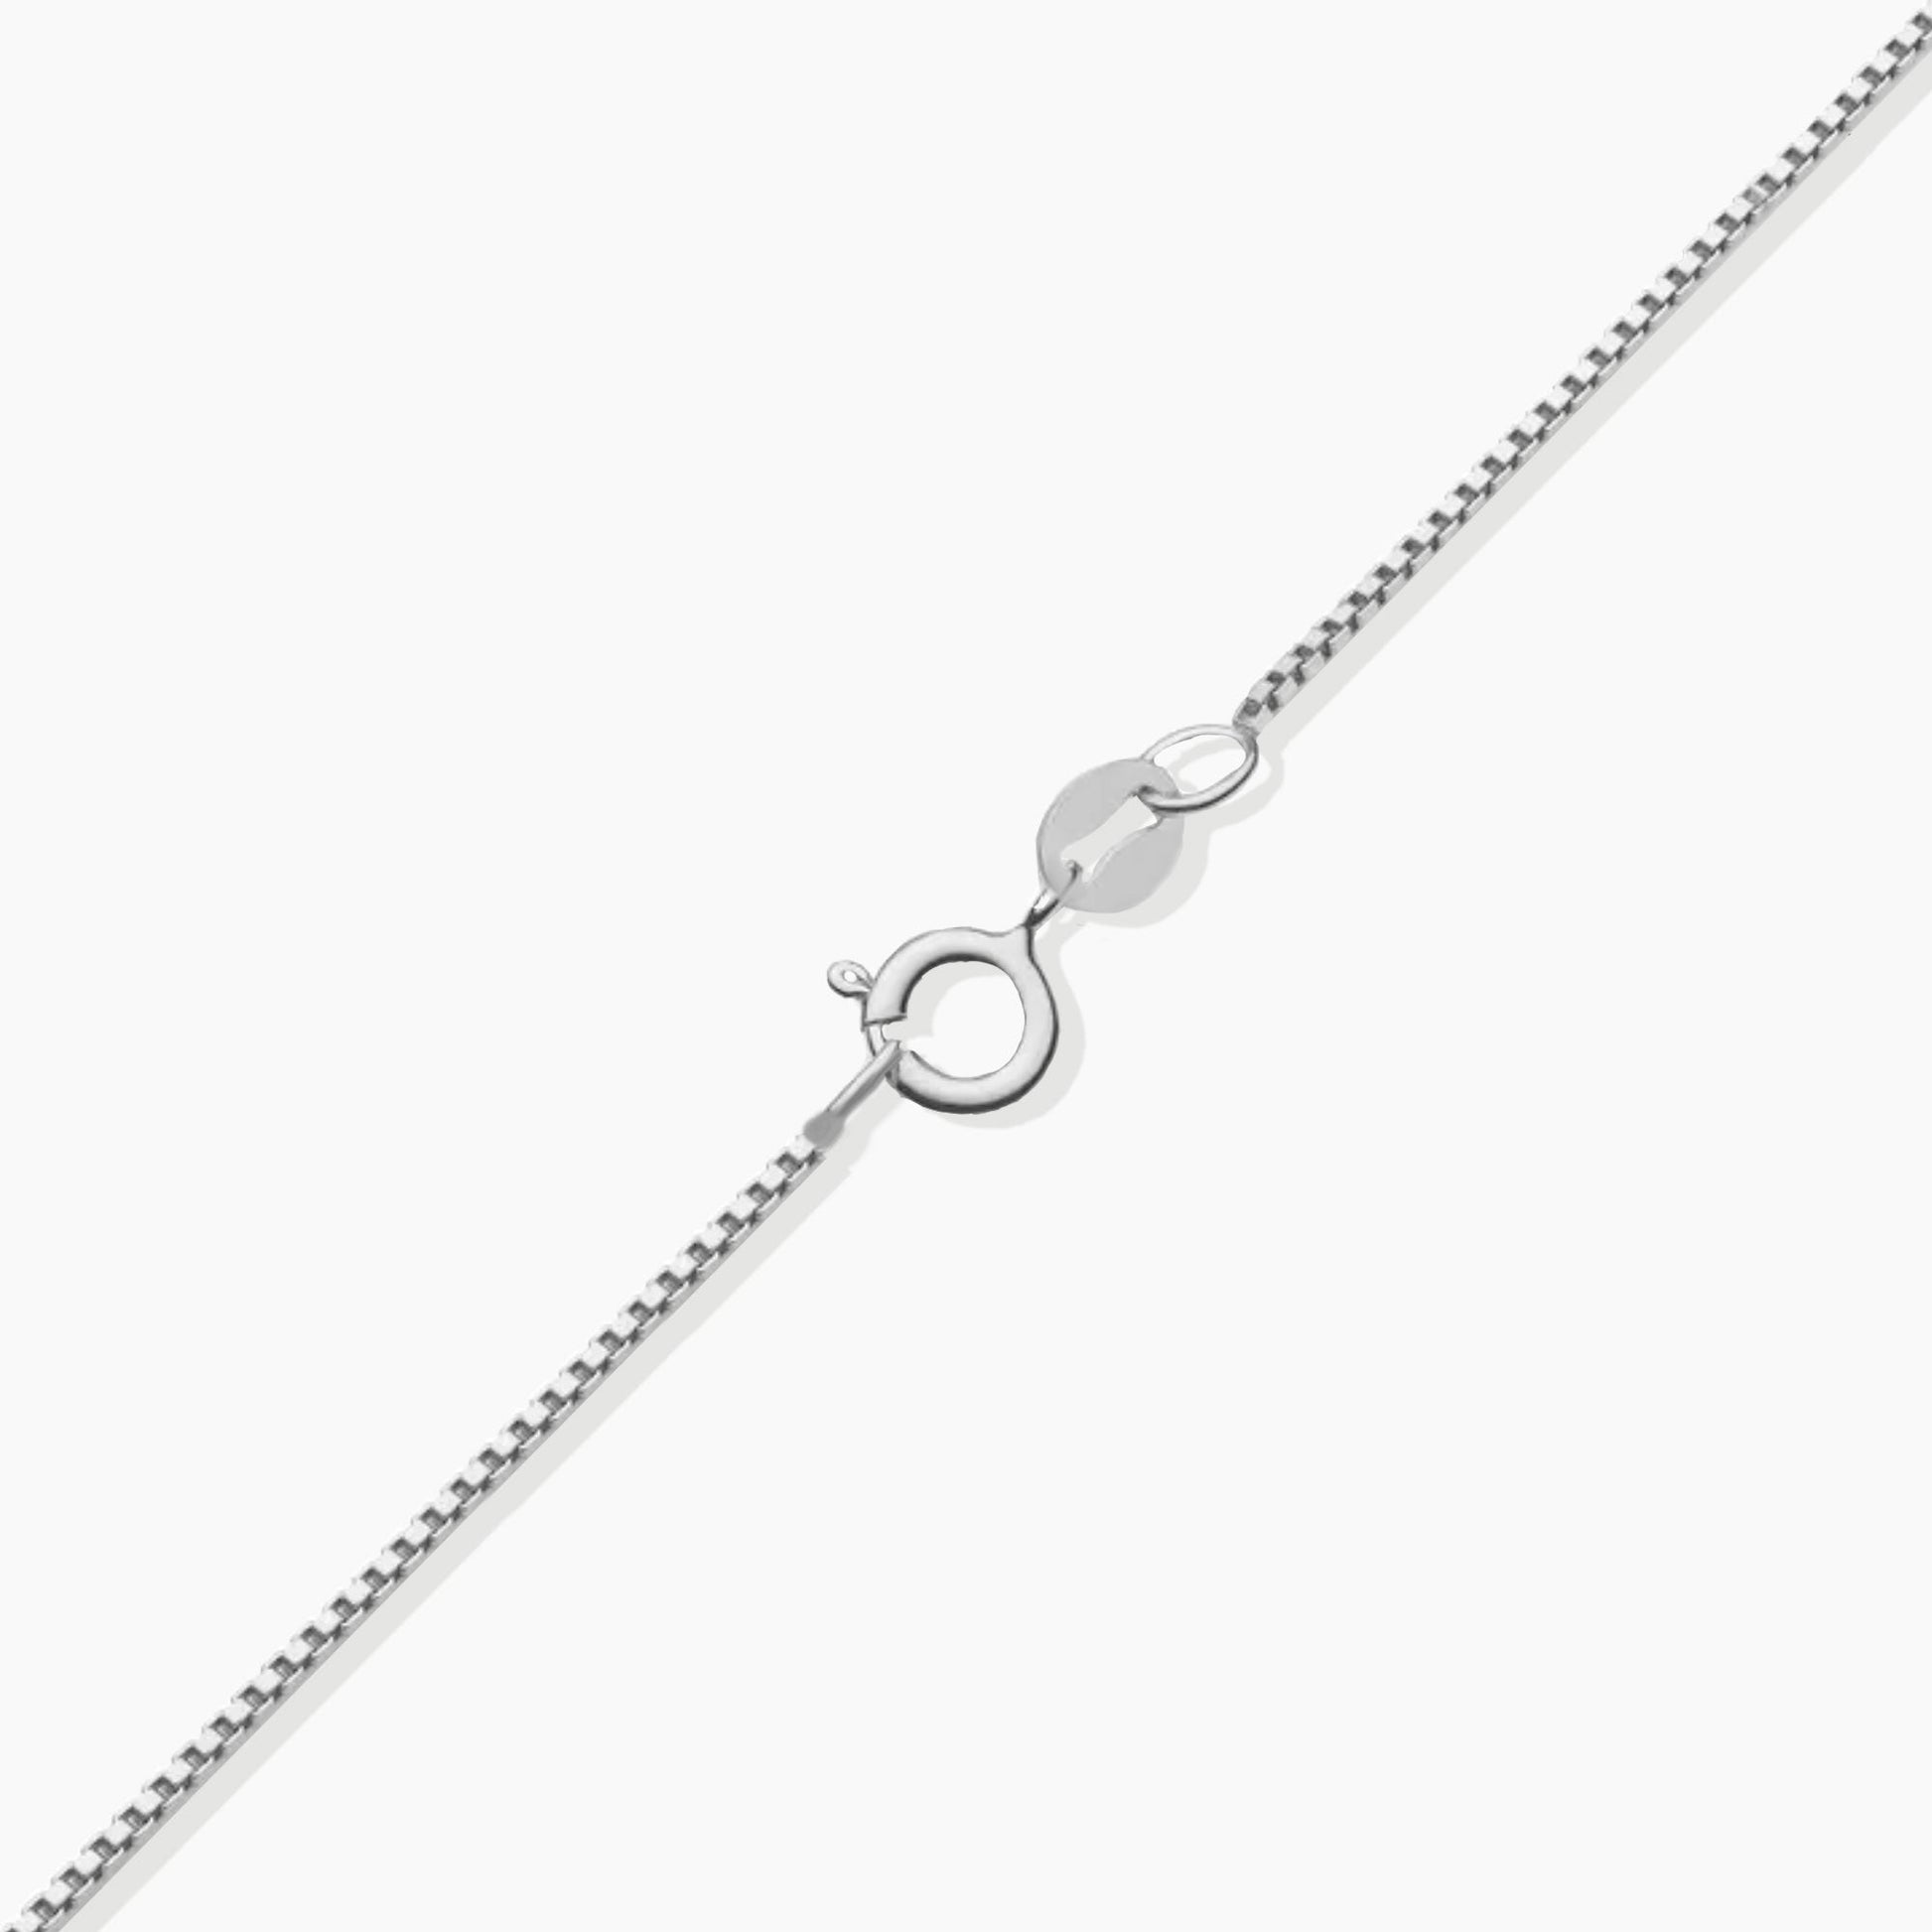 Sterling silver chain with spring clasp for London Blue Topaz Galaxy Pendant